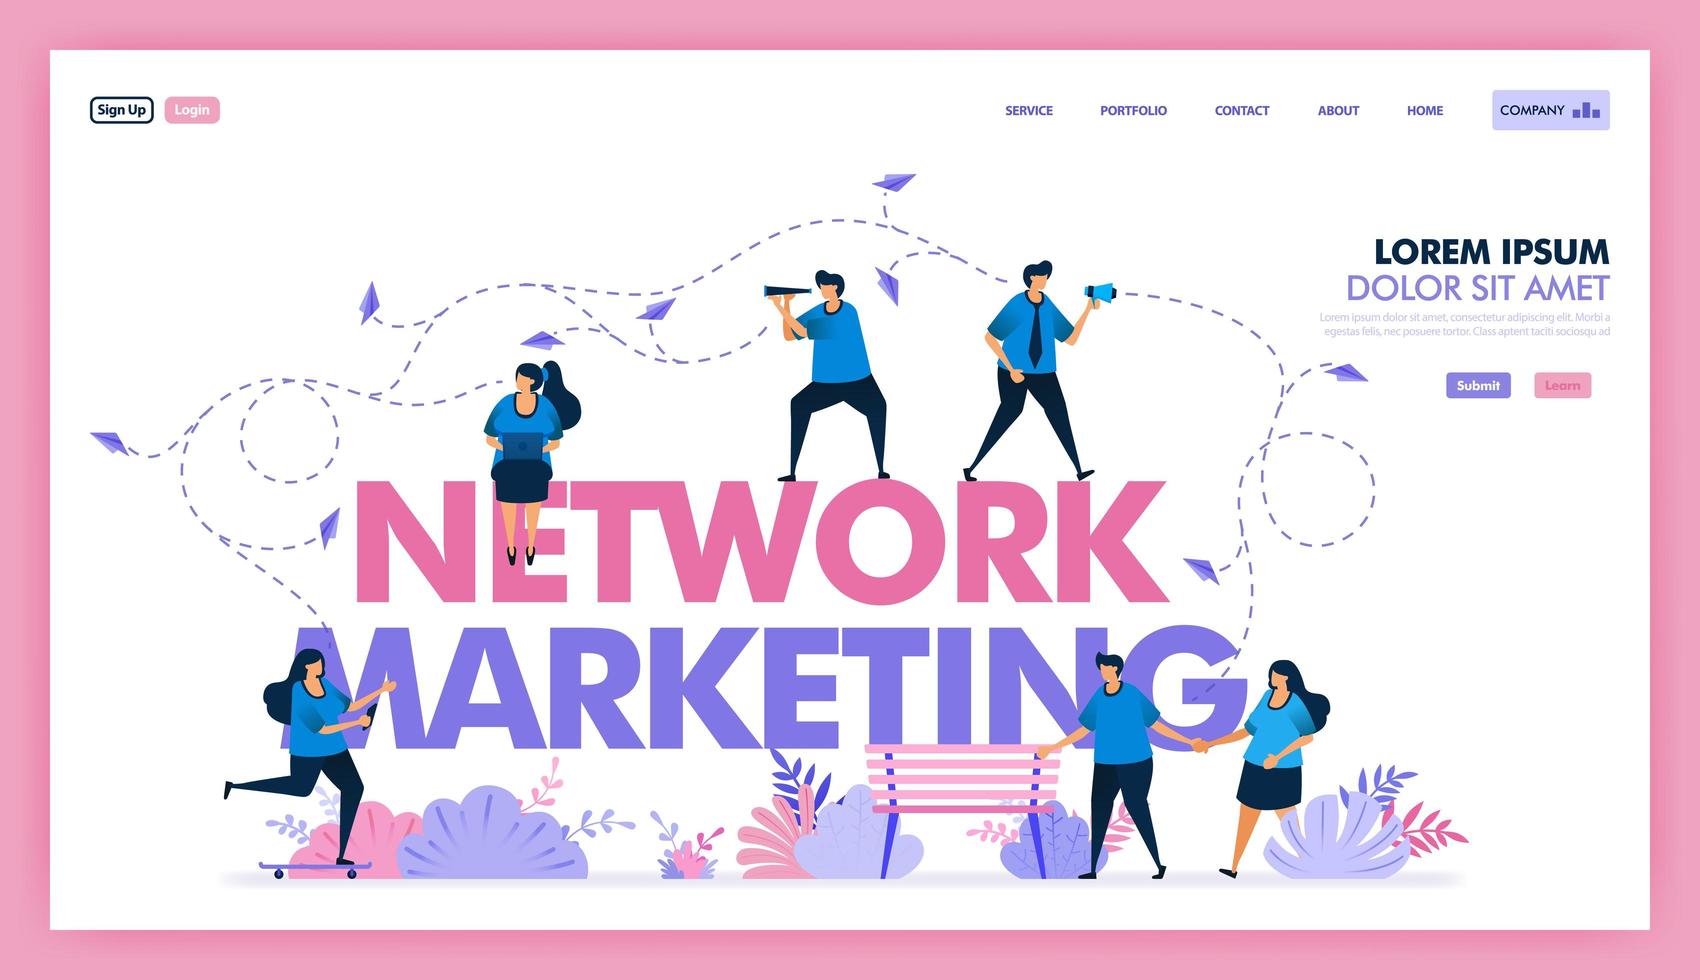 marketing network to exchange information and sell product, SEO and online marketing to boost sales value and profit, utilize social media with promo and ads content . Flat illustration vector design.